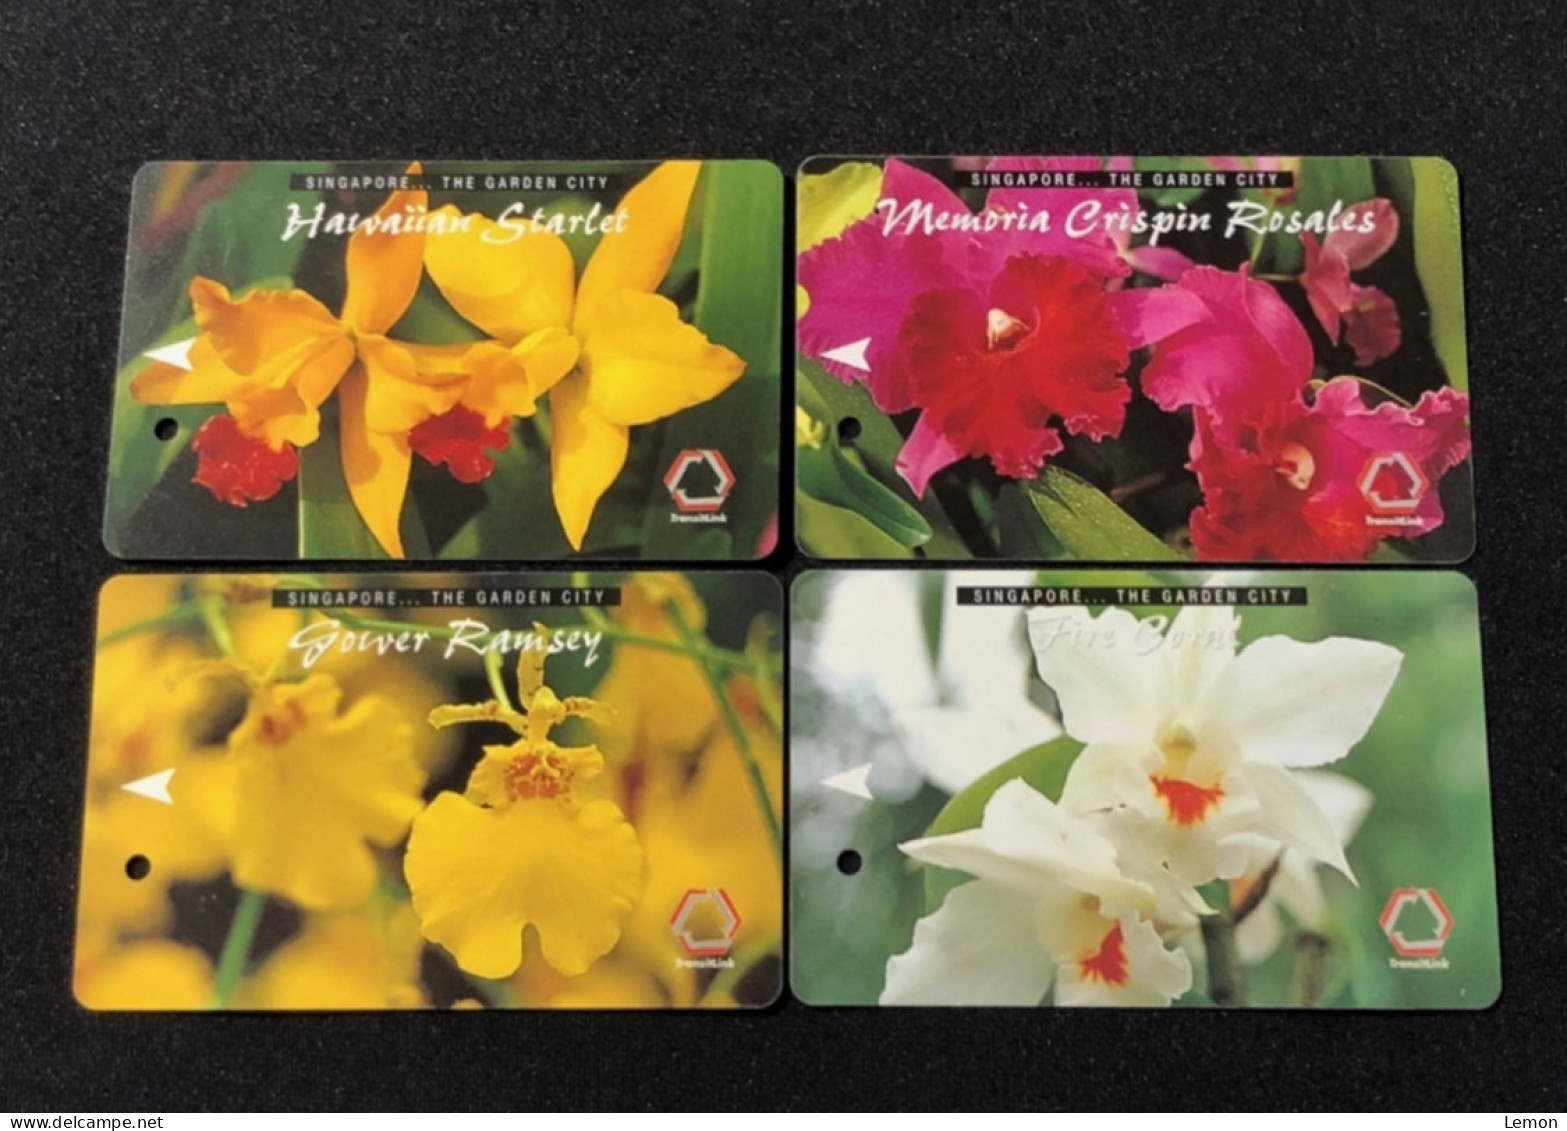 Singapore SMRT TransitLink Metro Train Subway Ticket Card, The Garden City Orchid Flower, Set Of 4 Used Cards - Singapur